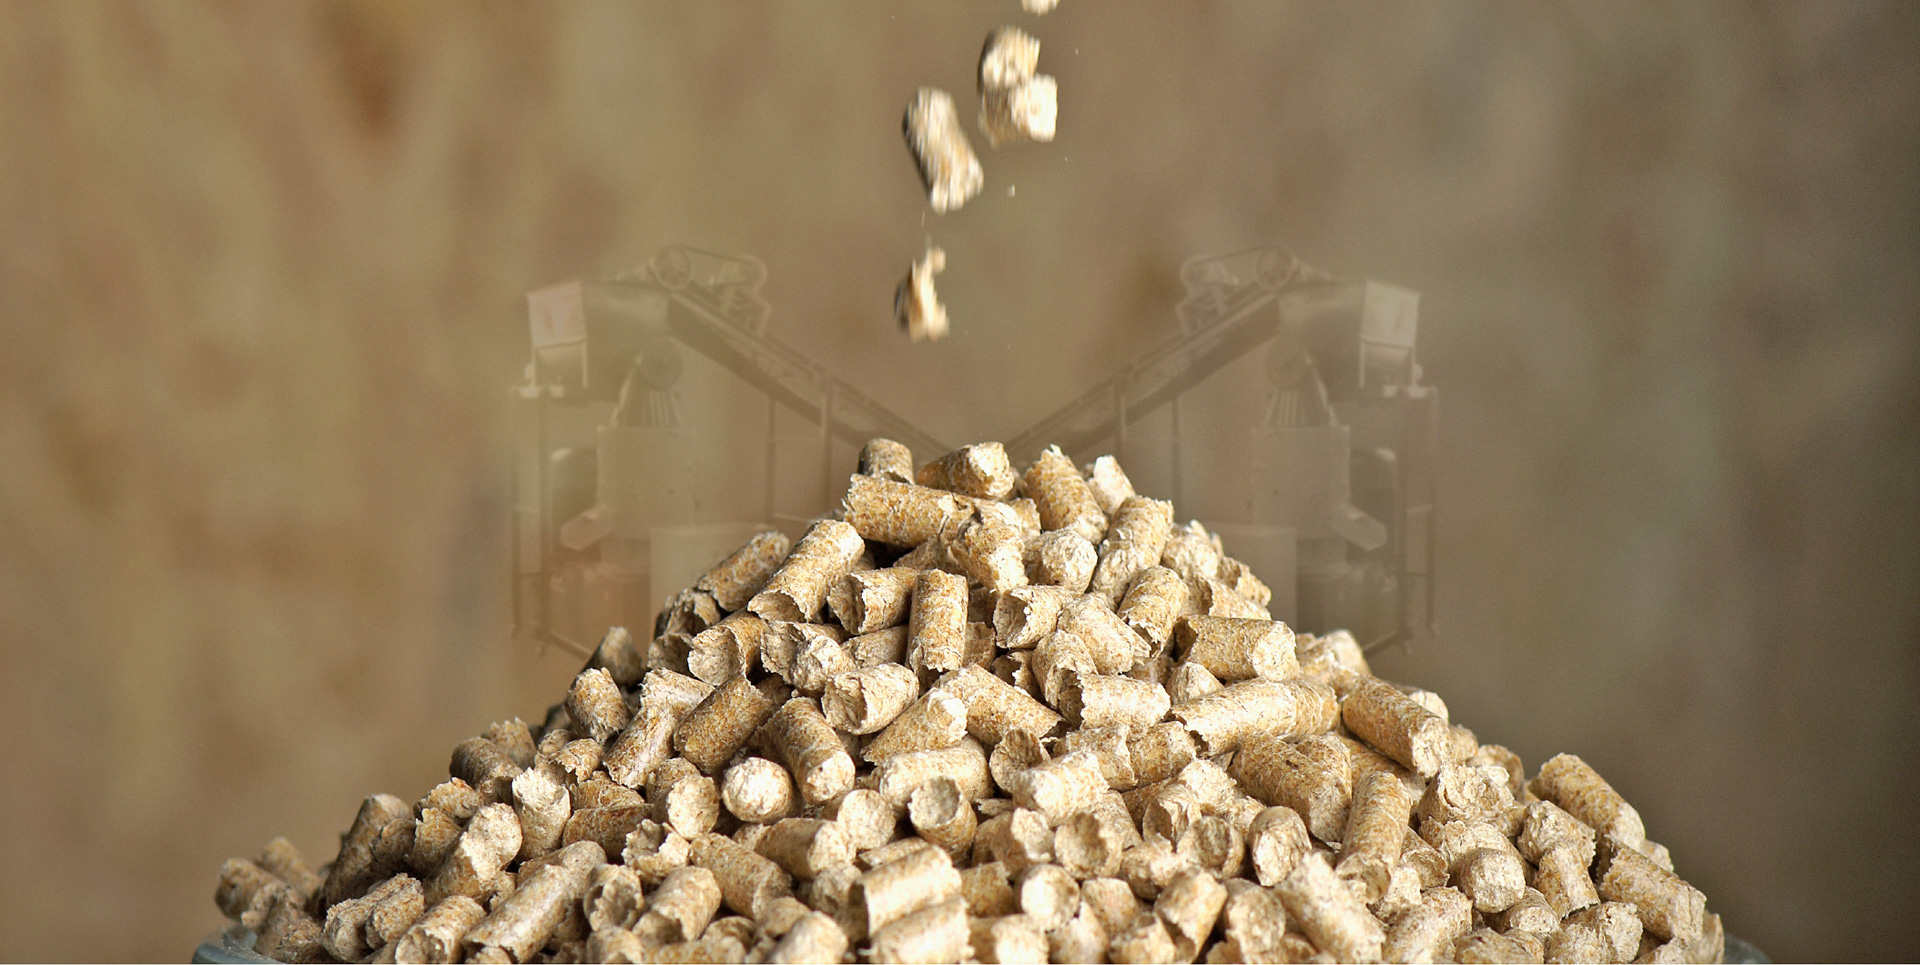 Our job is to make pellet from every product